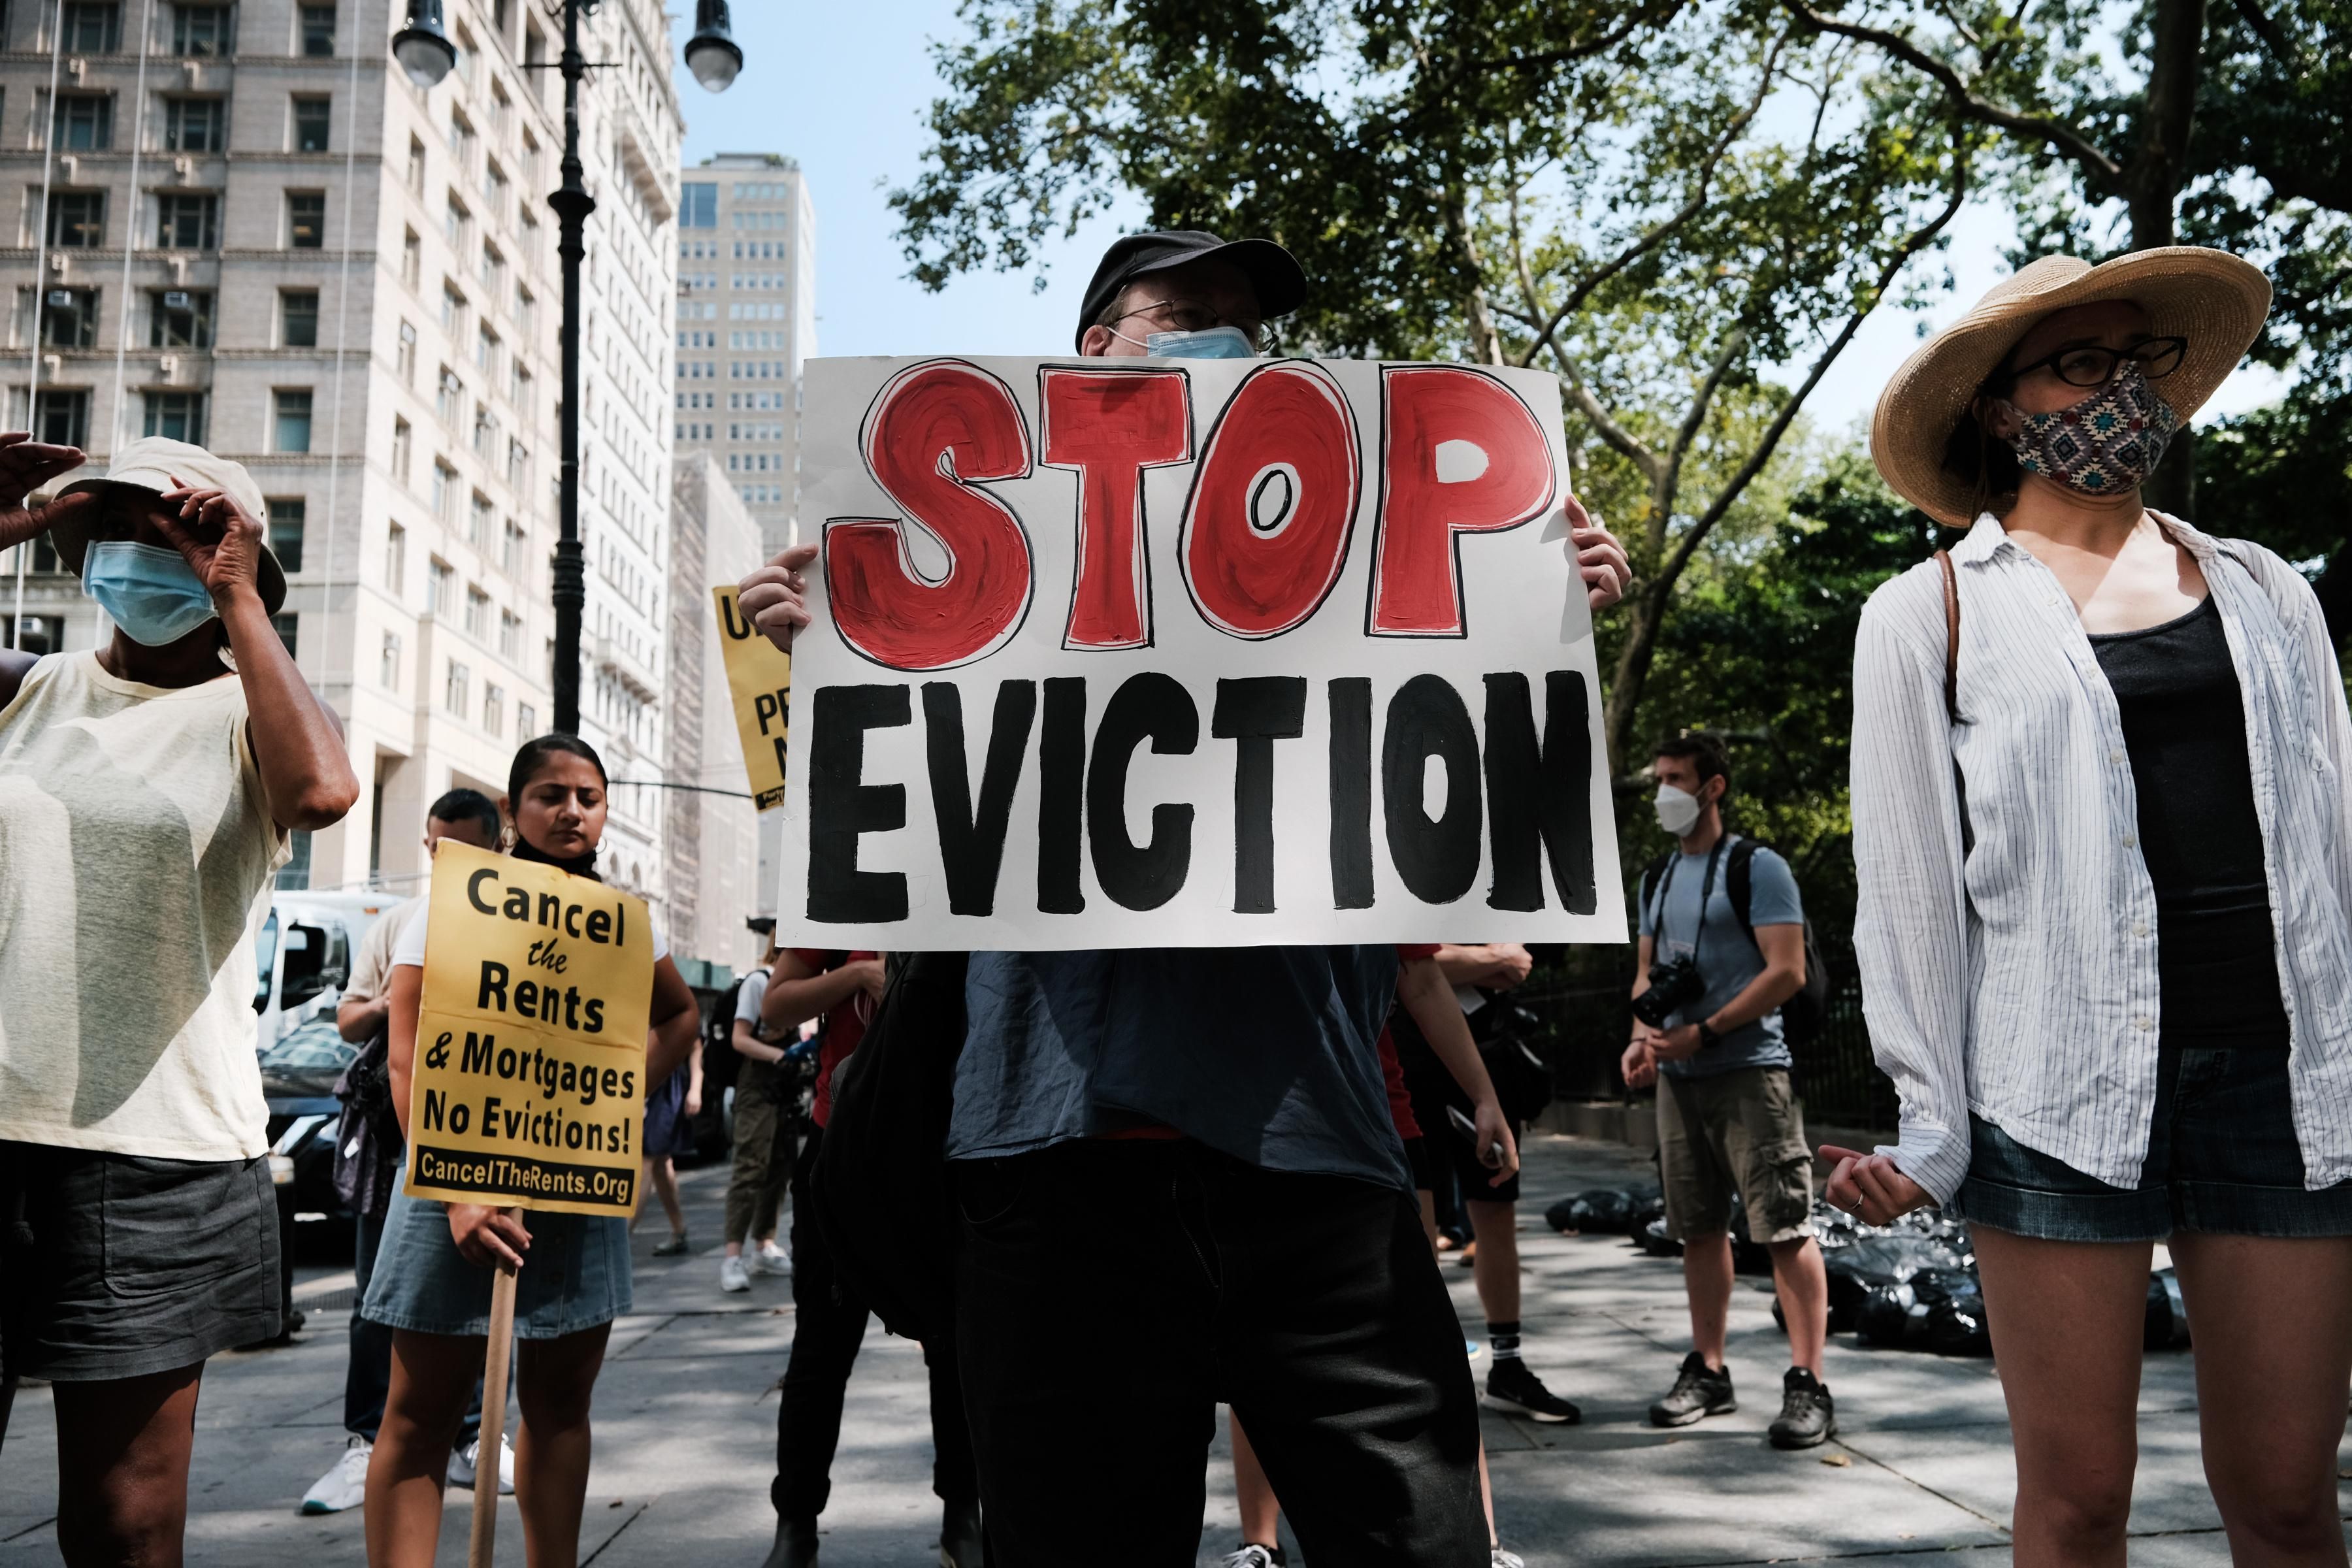 Demonstrators protest evictions in New York City